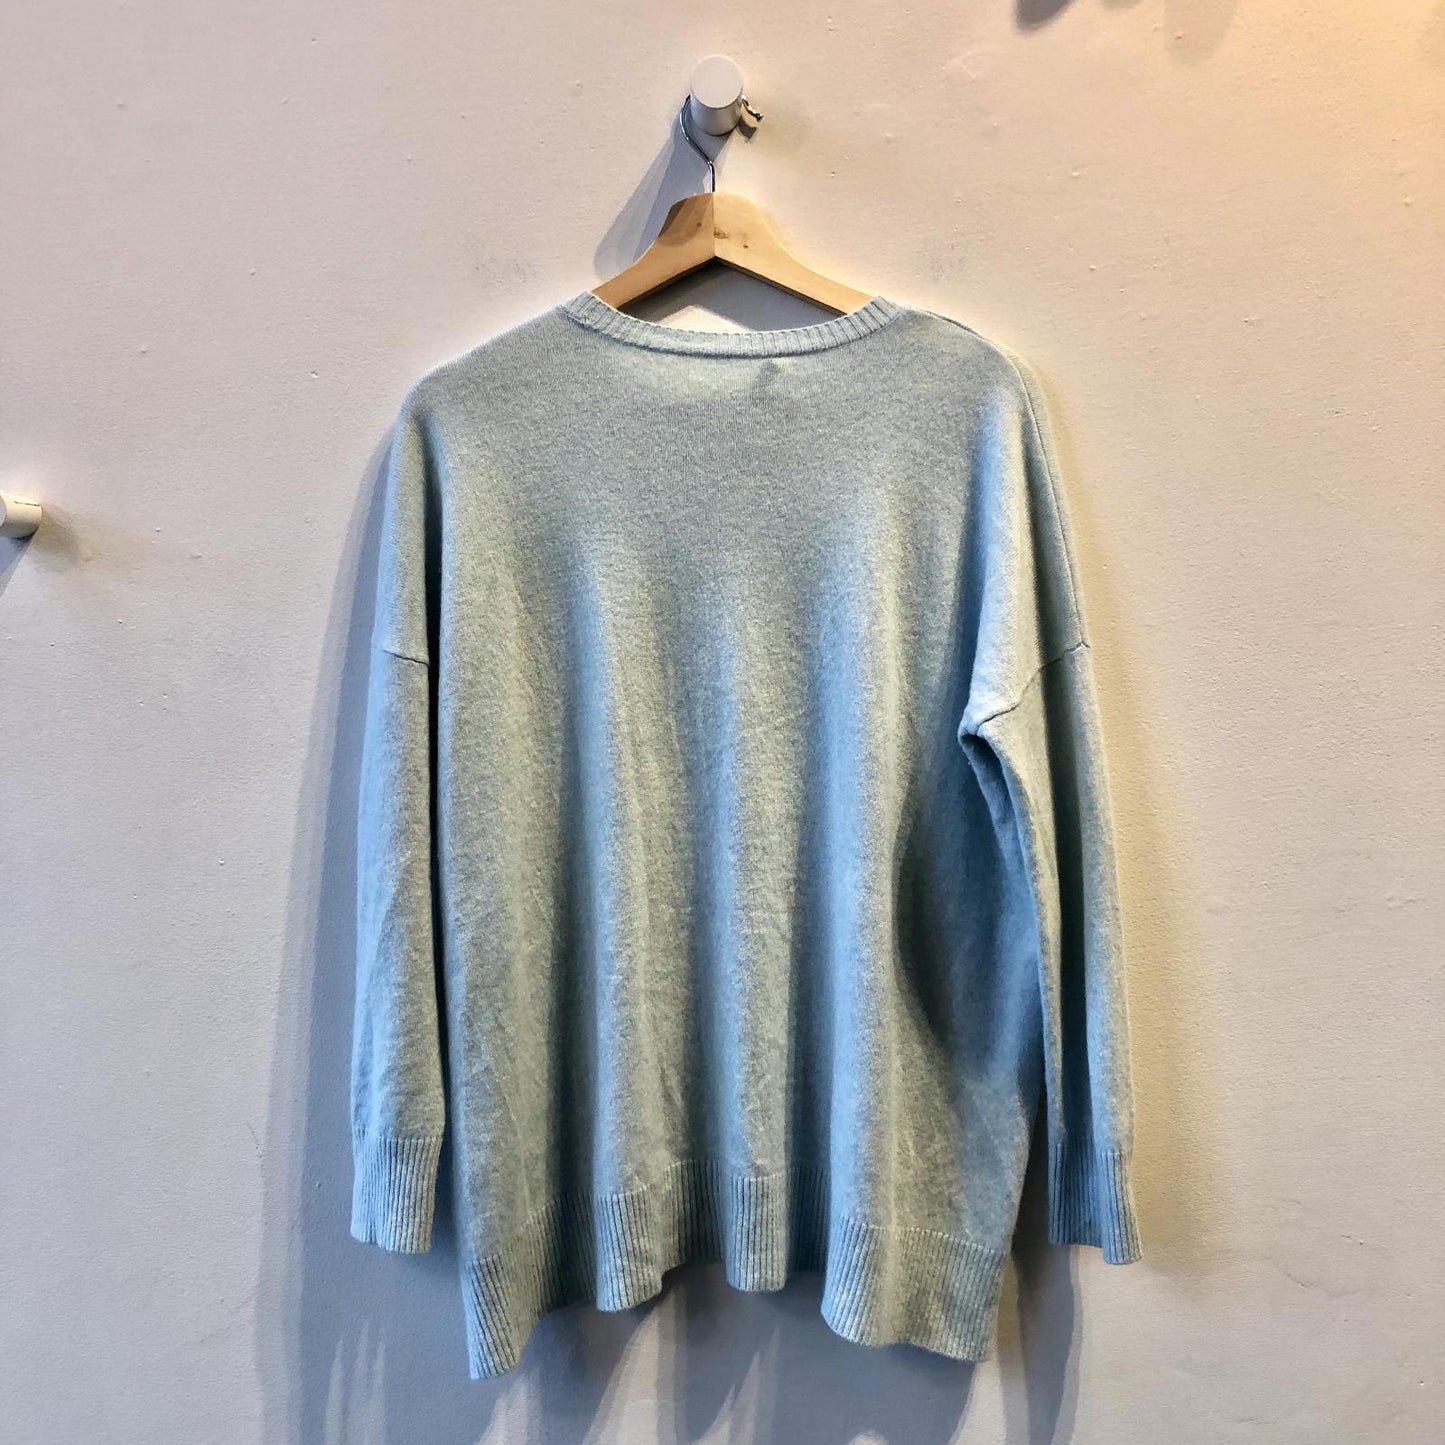 S - Eileen Fisher Light Blue Pullover Tunic Length 100% Cashmere Sweater 0721DK